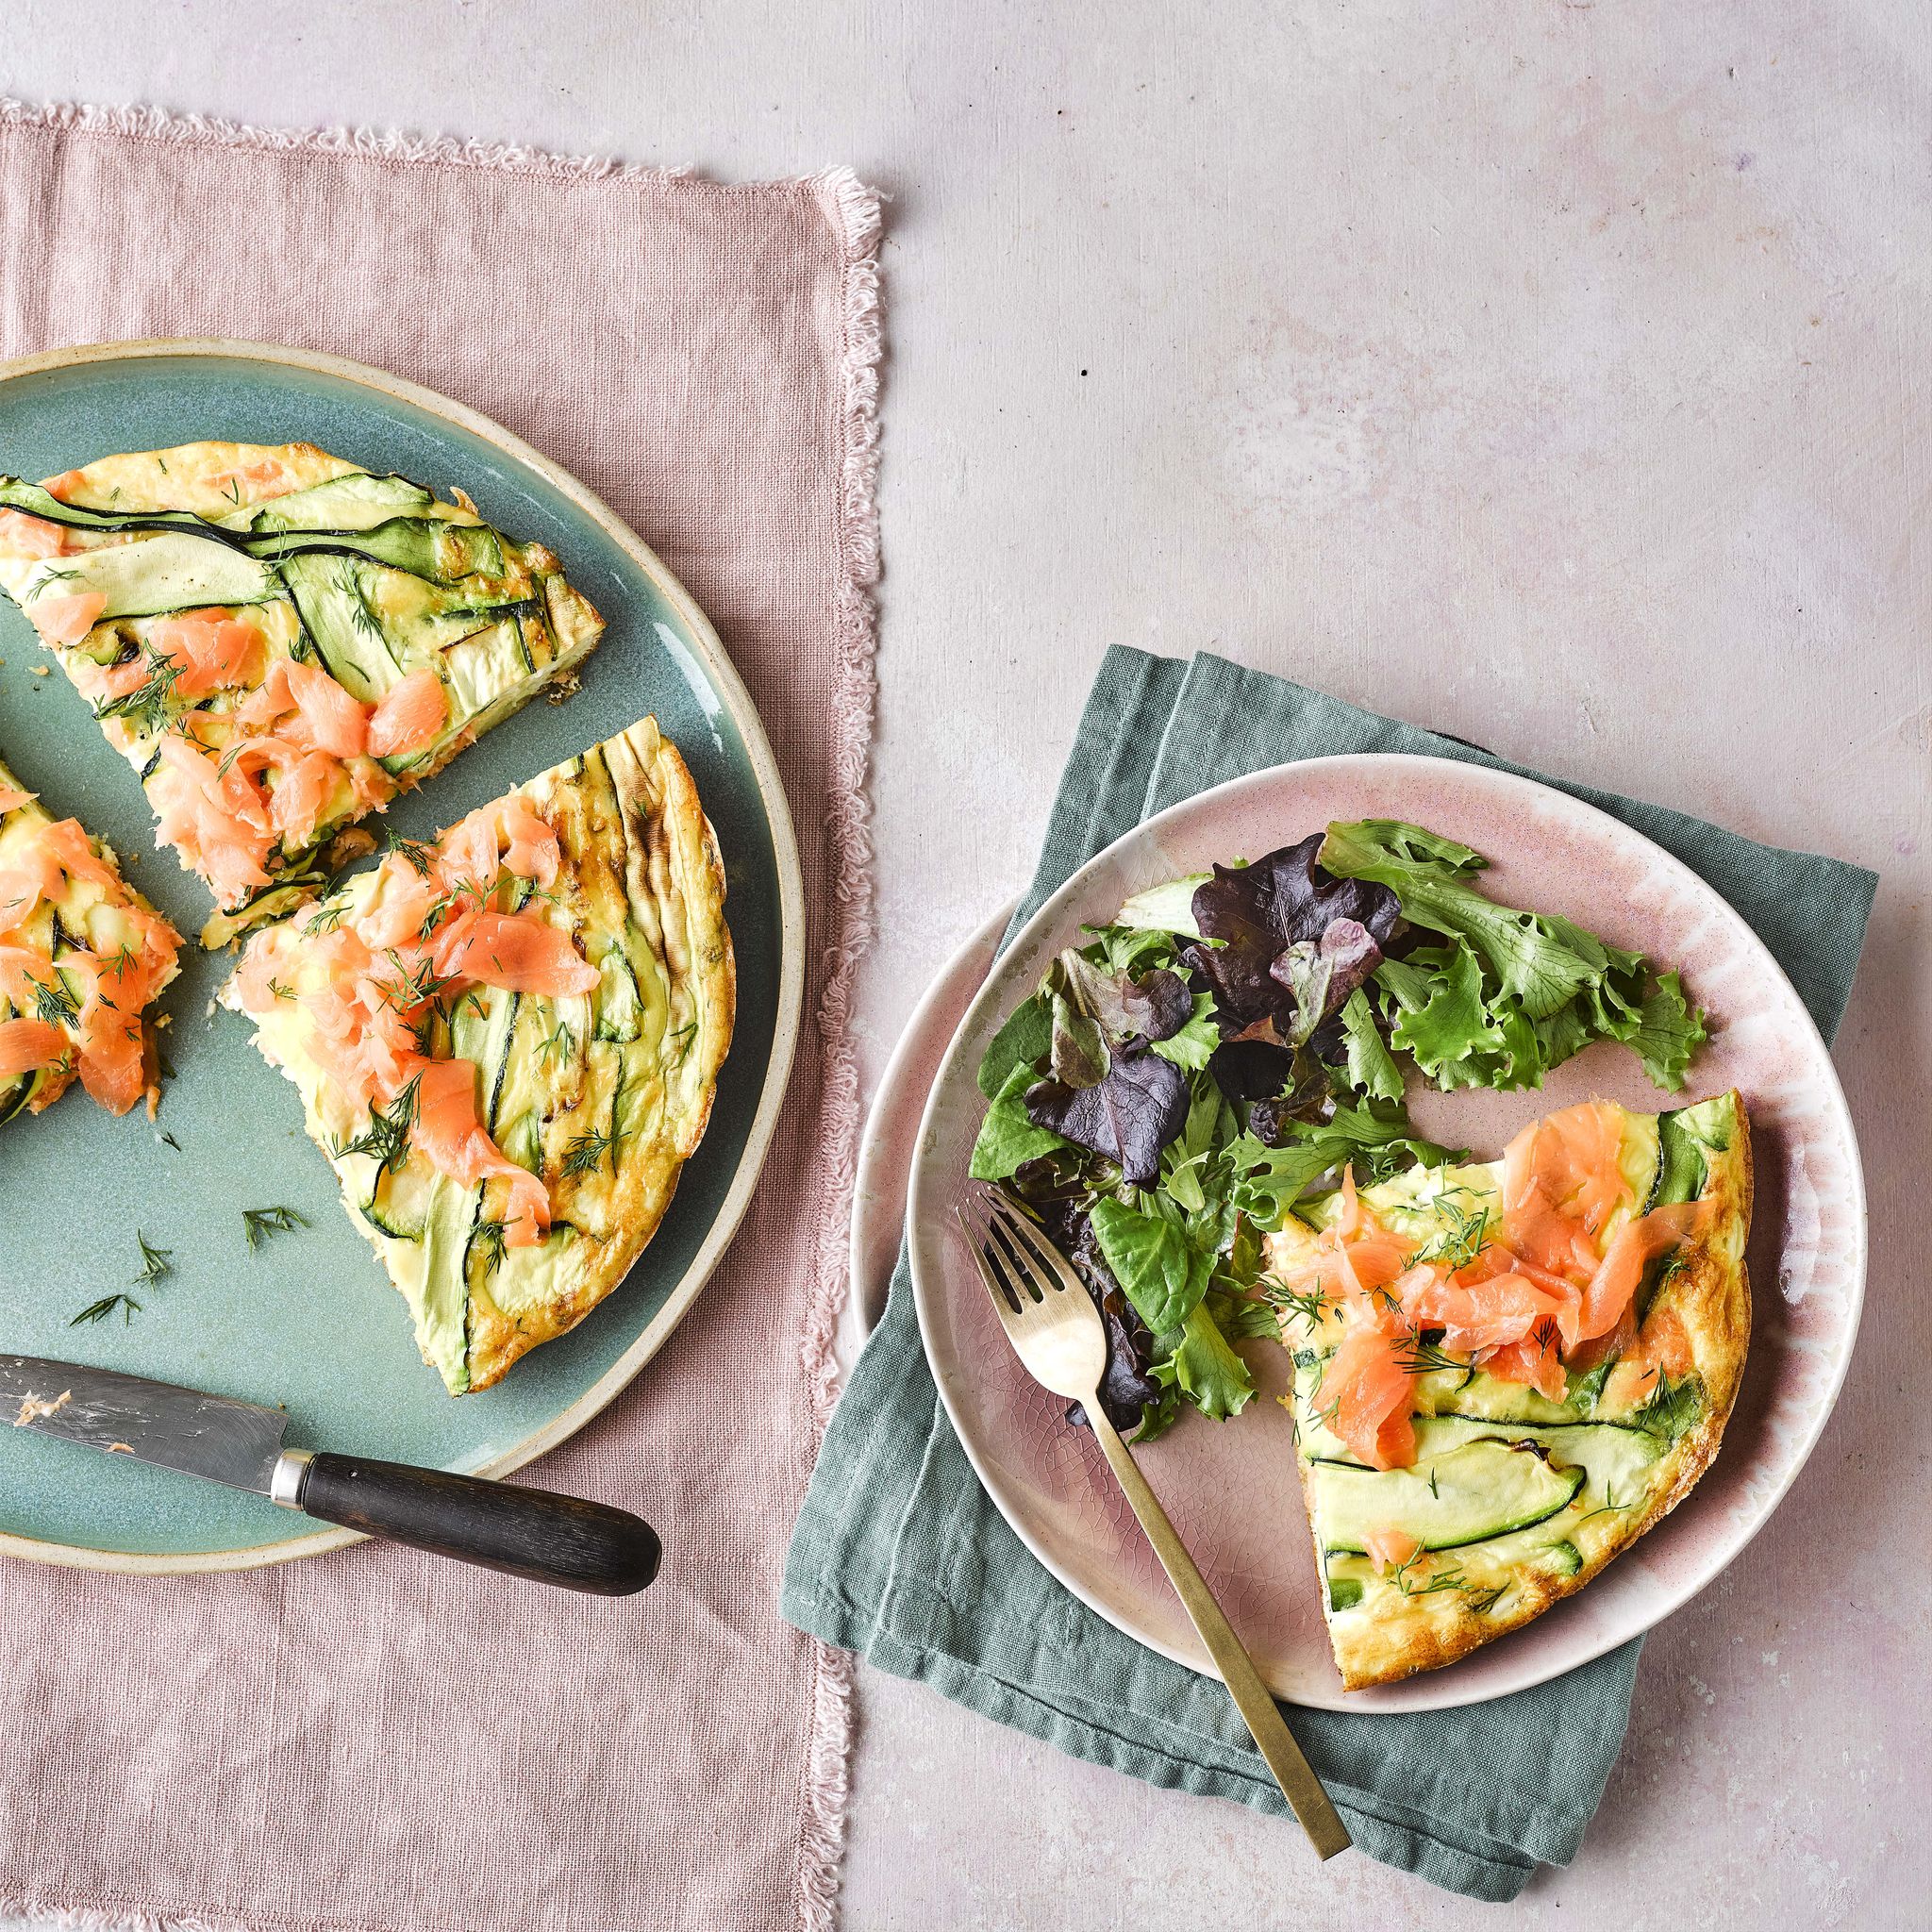 Smoked Salmon, Courgette and Dill Frittata